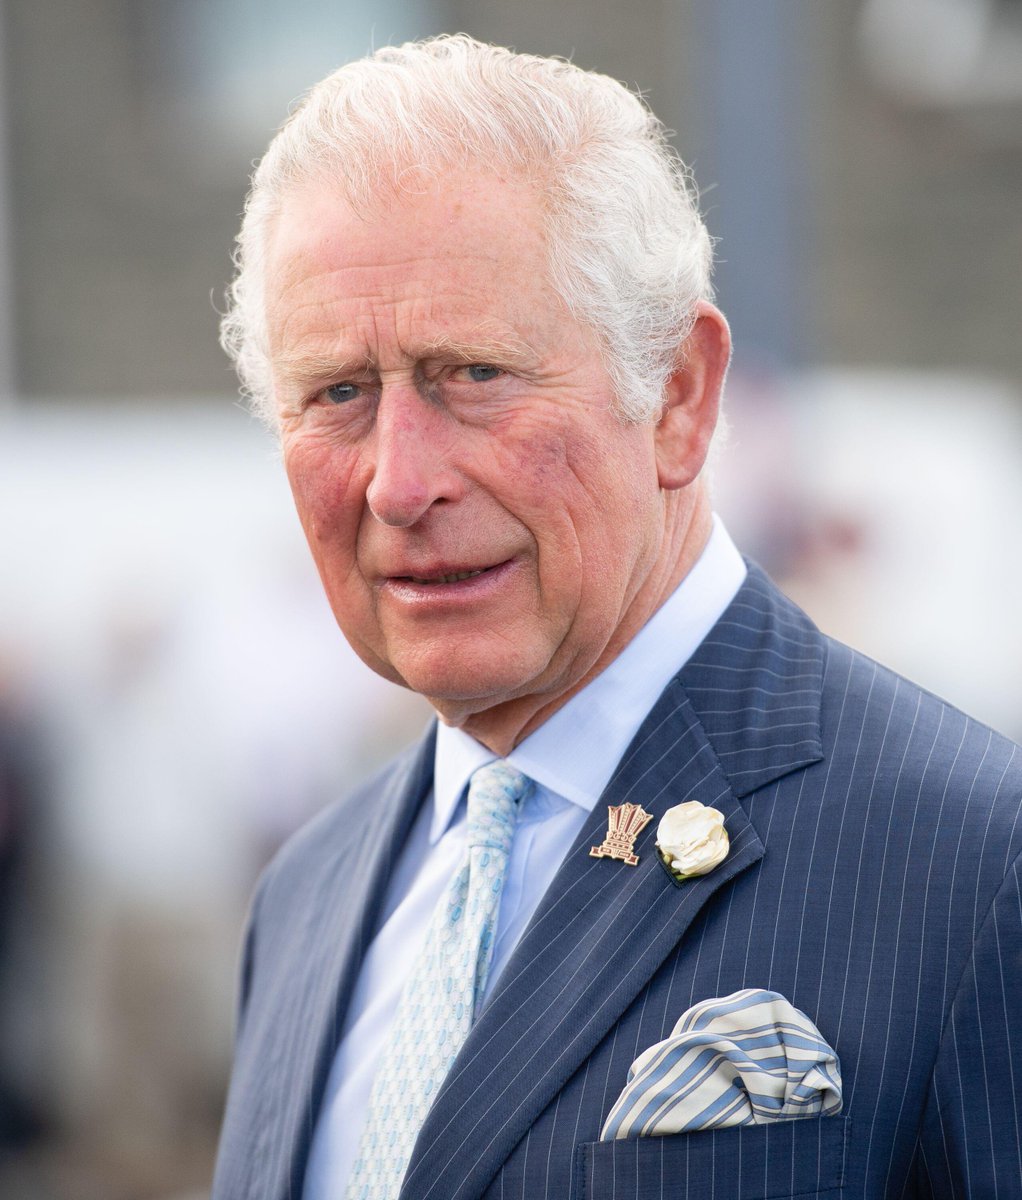 We are delighted to welcome His Majesty as our new Patron. King Charles has been an active supporter of the Red Cross for many years, generously giving his time and deep commitment to support people in crisis here in the UK and around the world. 📸 Alamy